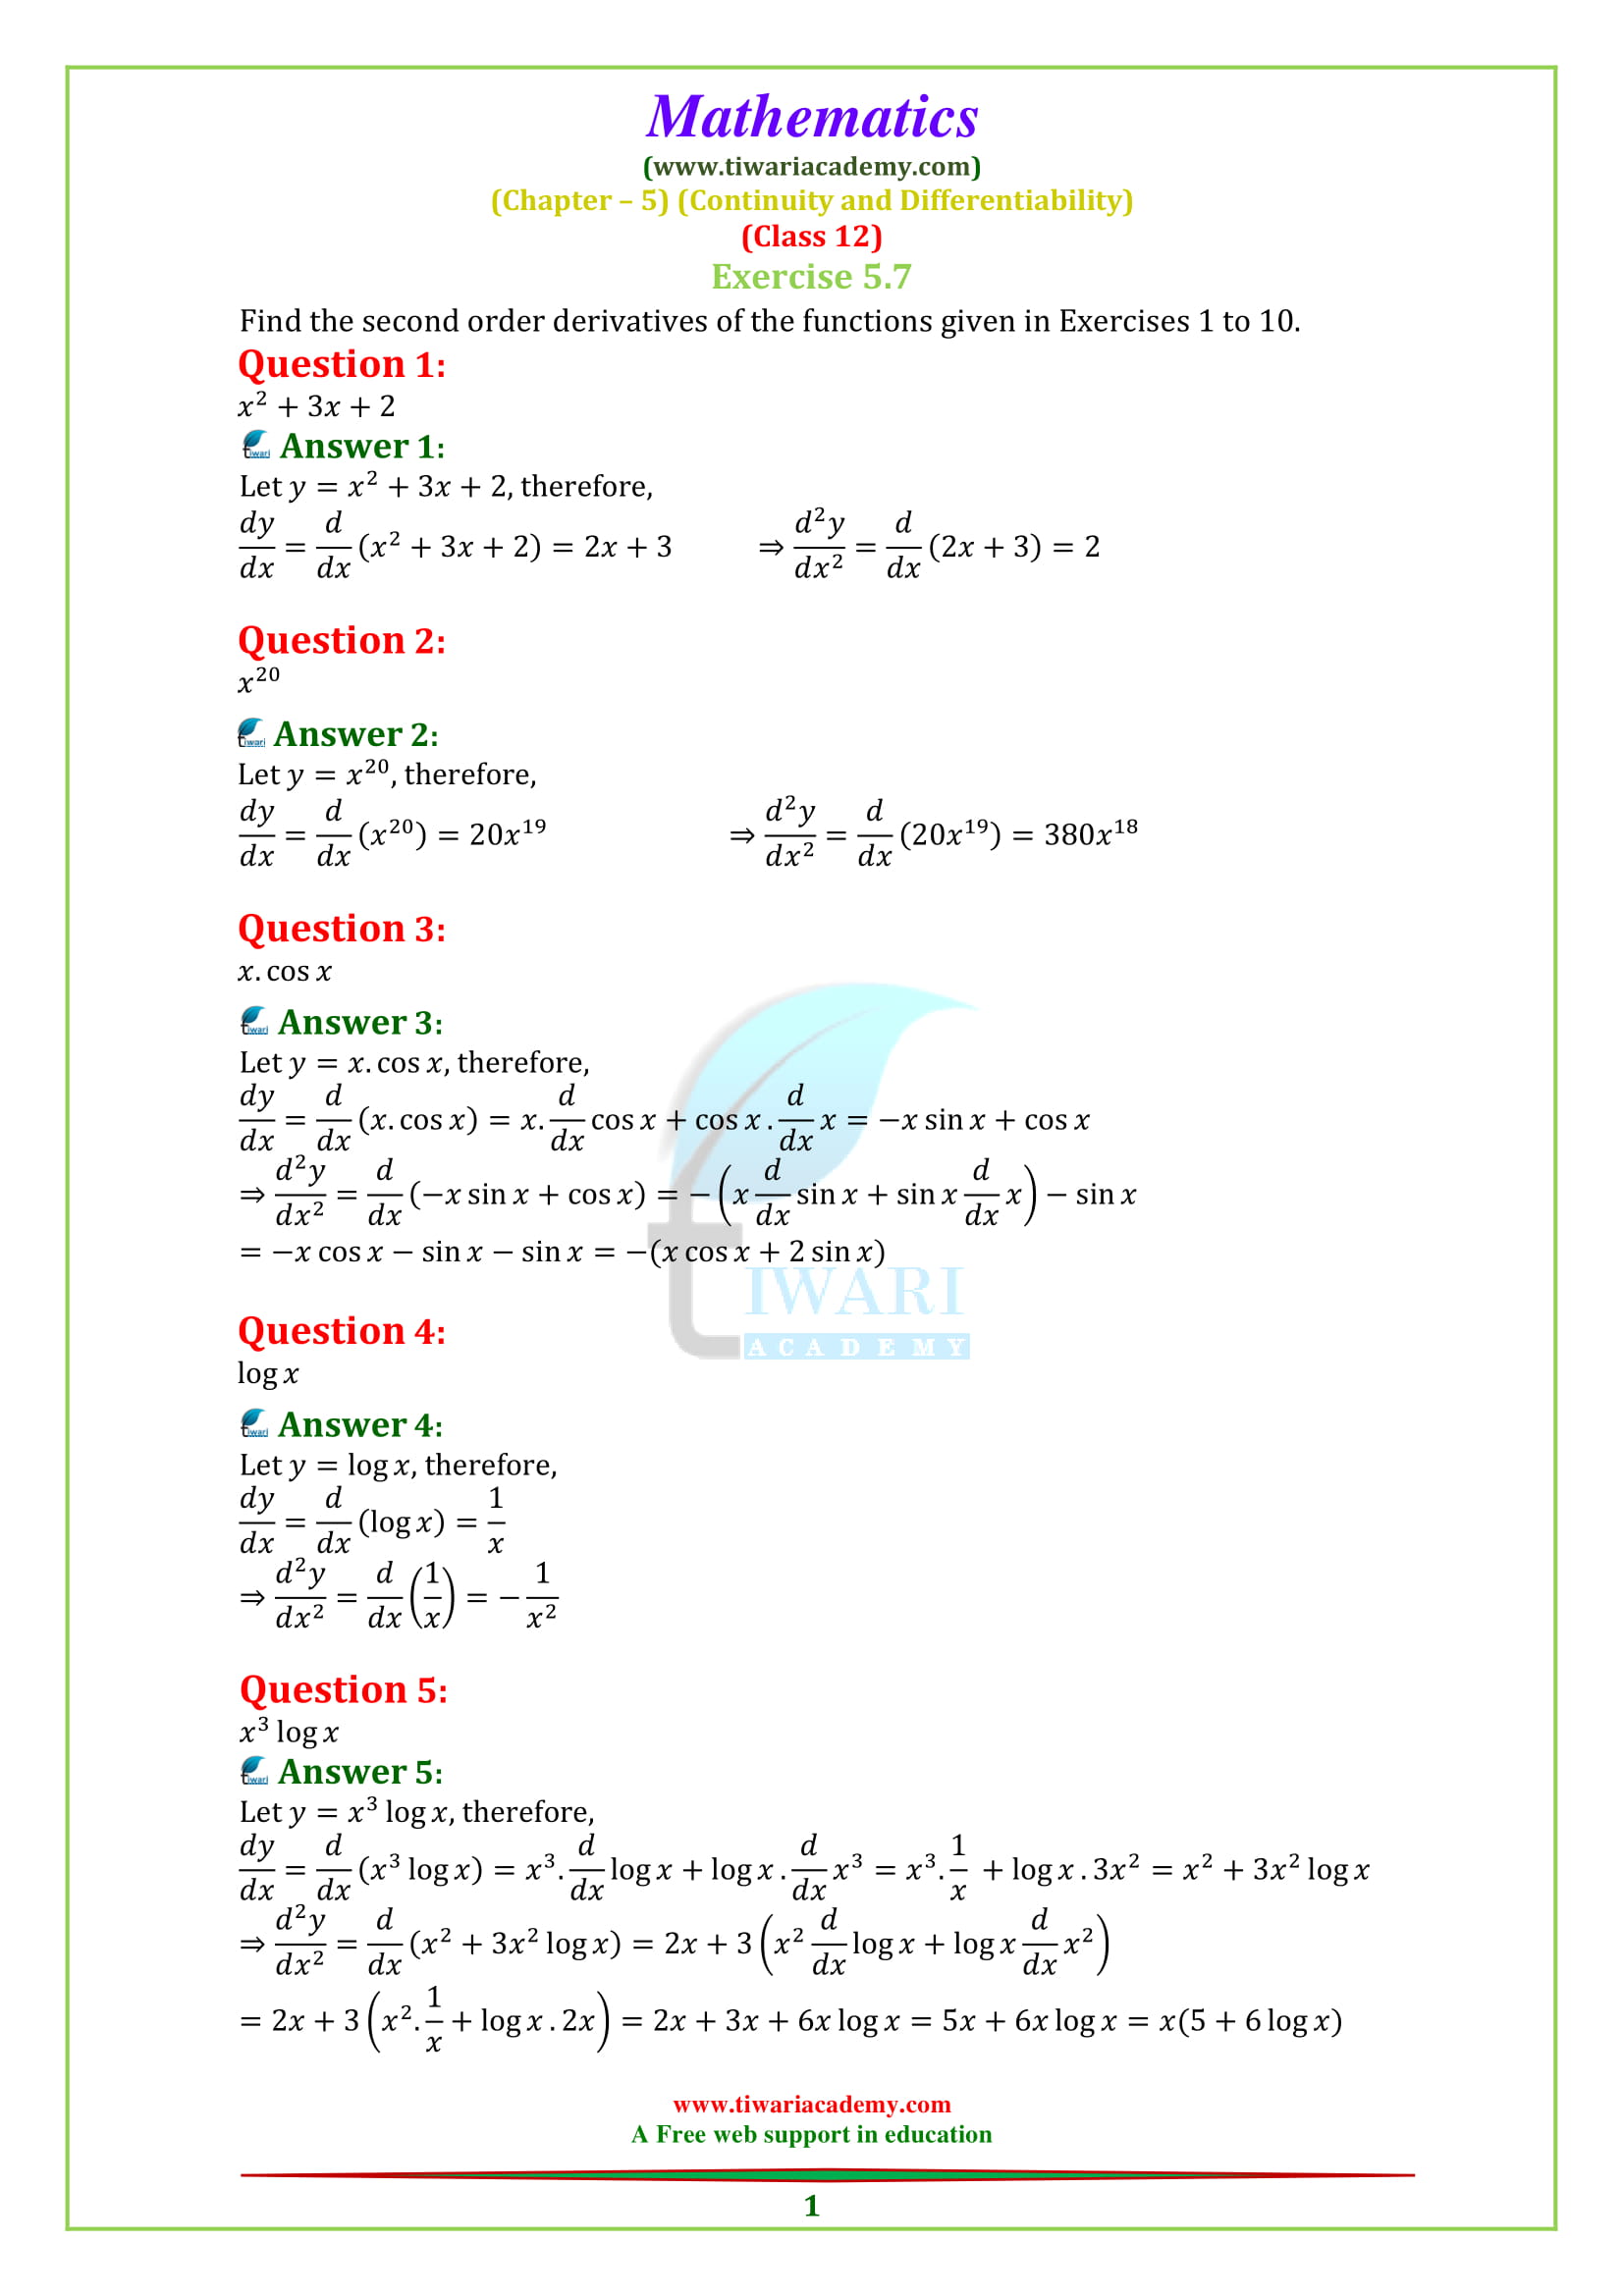 NCERT Solutions for Class 12 Maths Chapter 5 Exercise 5.7 Continuity